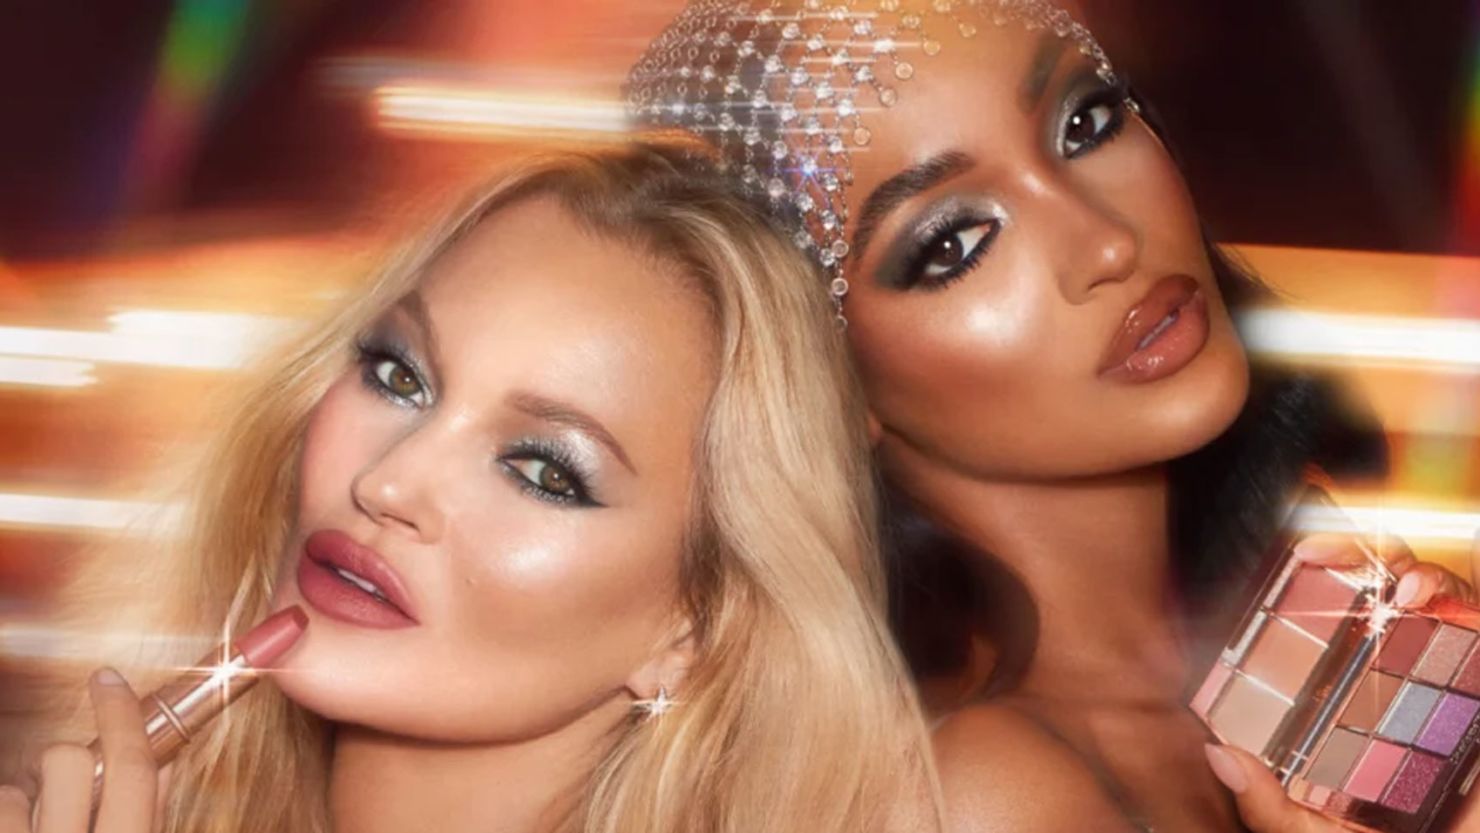 Festival Glitter: Ultimate Guide to the Perfect Look!